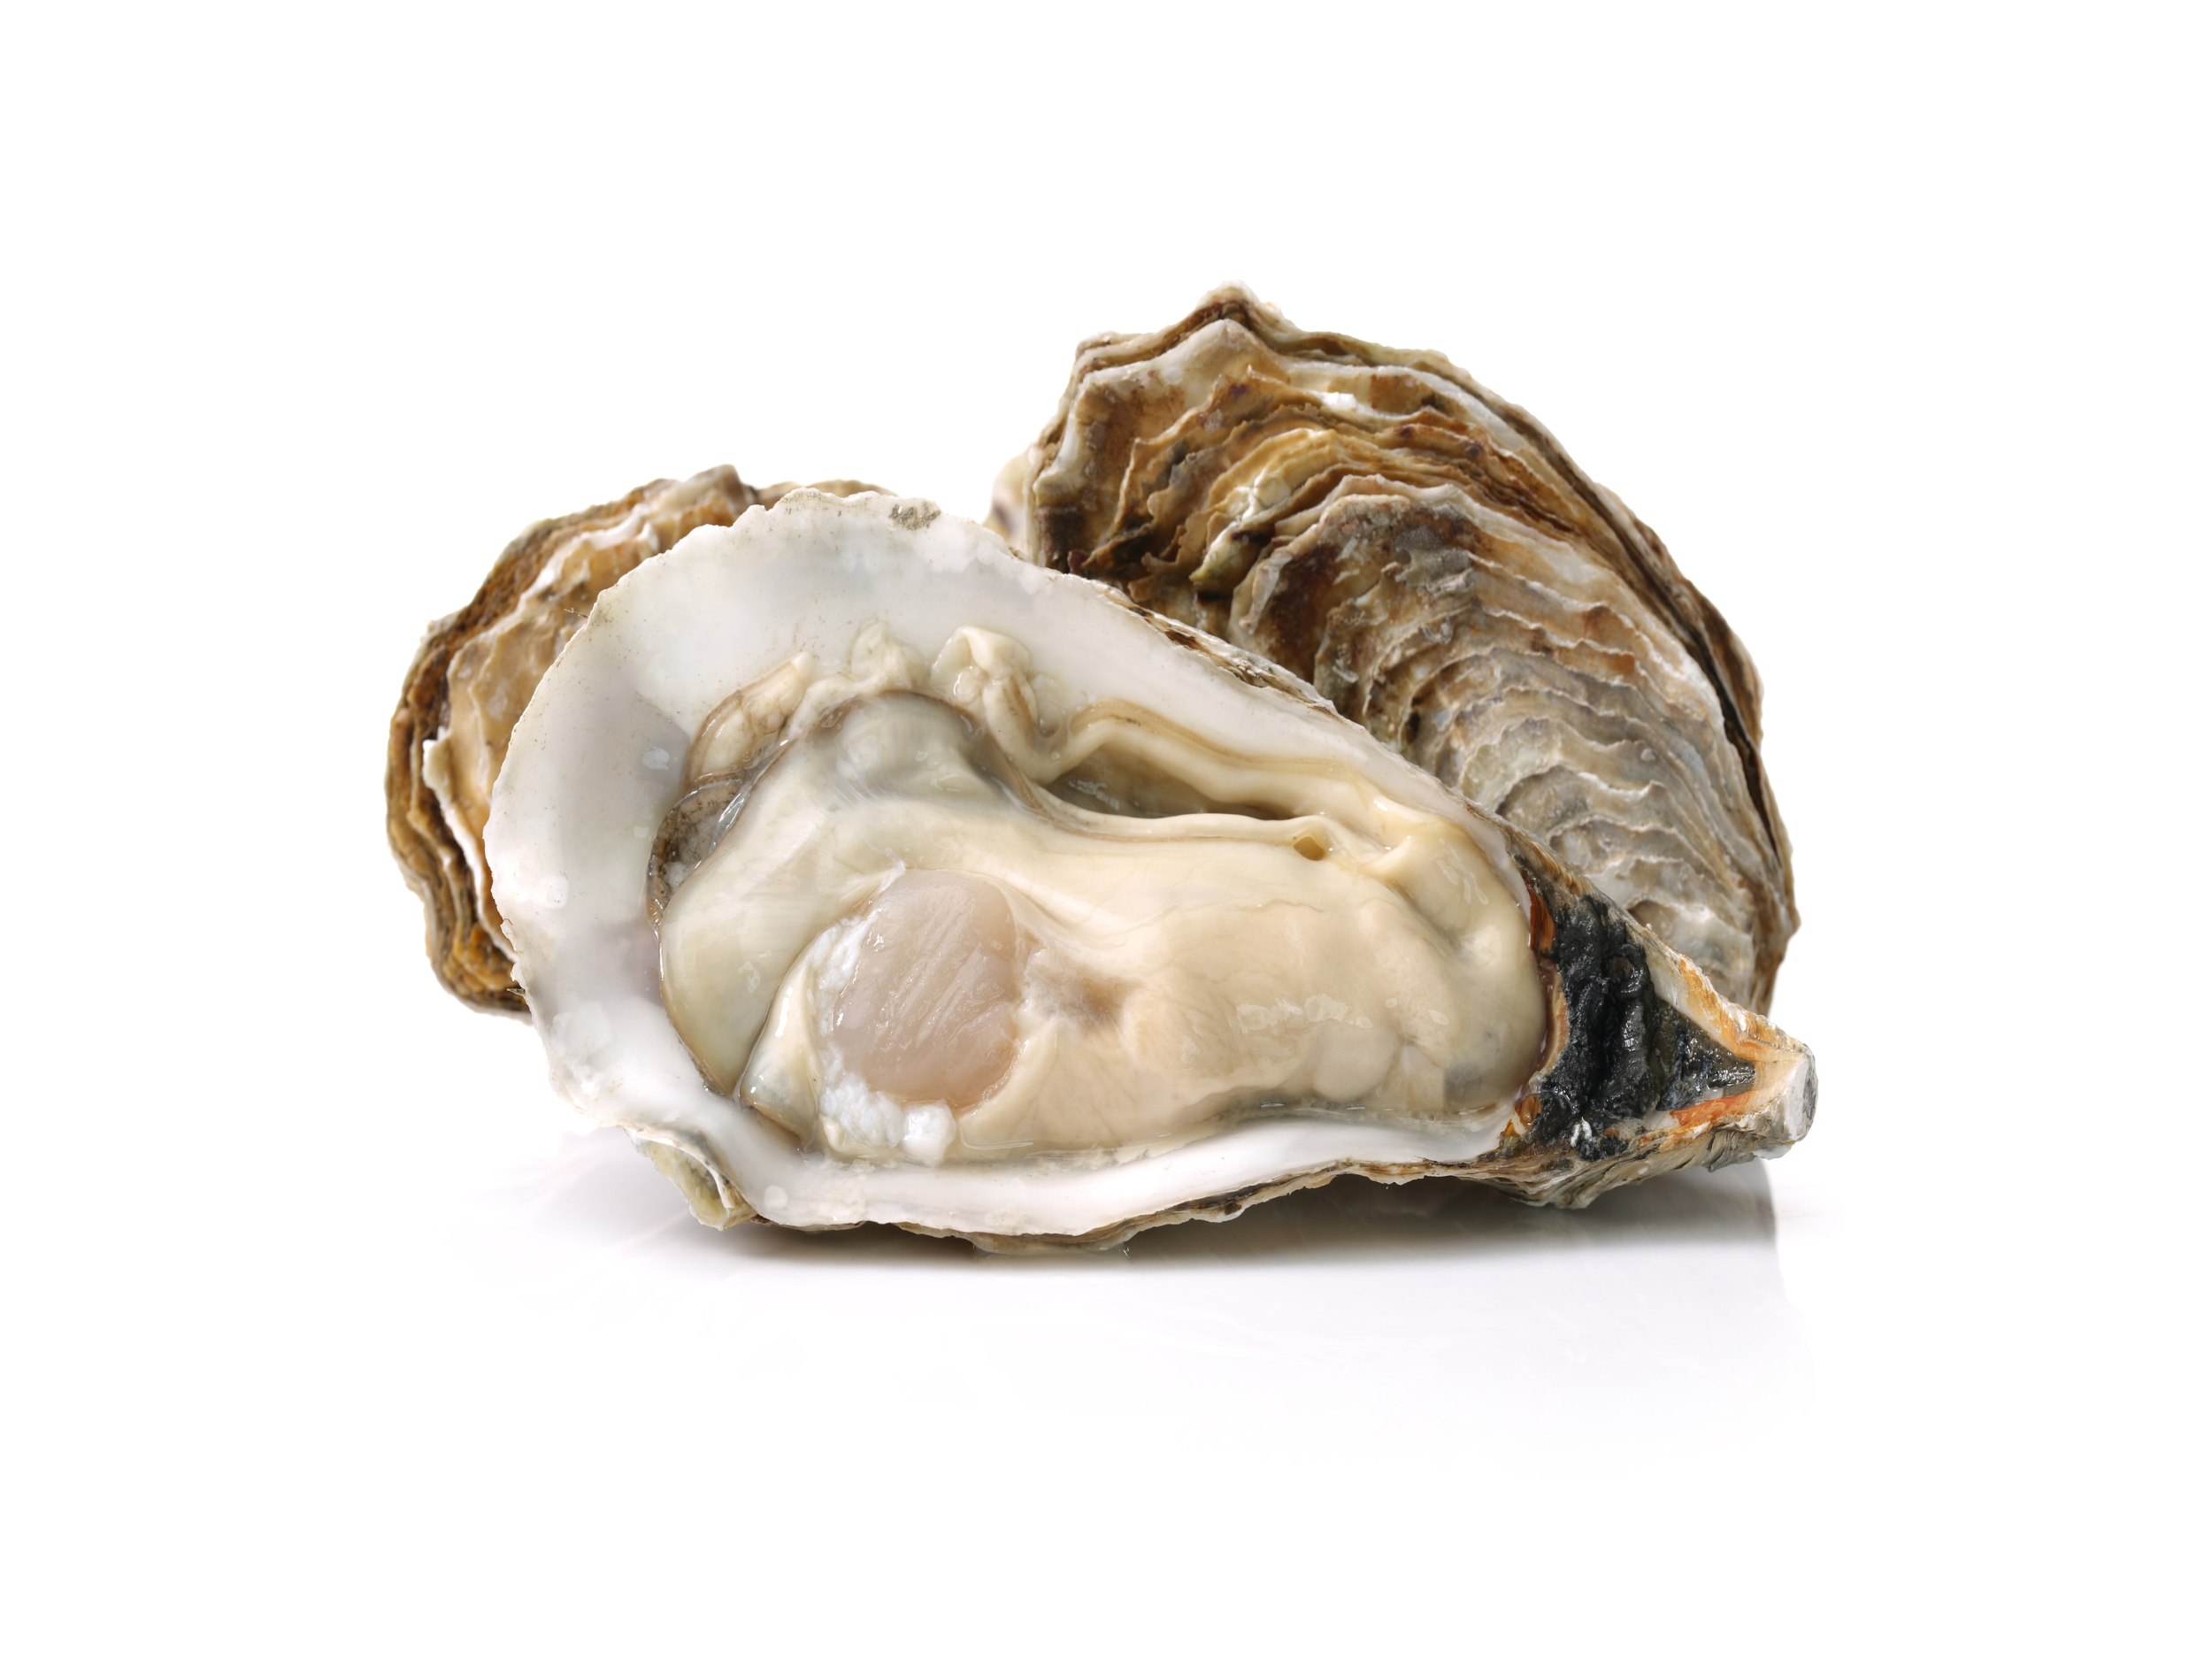 Photograph showcasing the unique features of oysters.